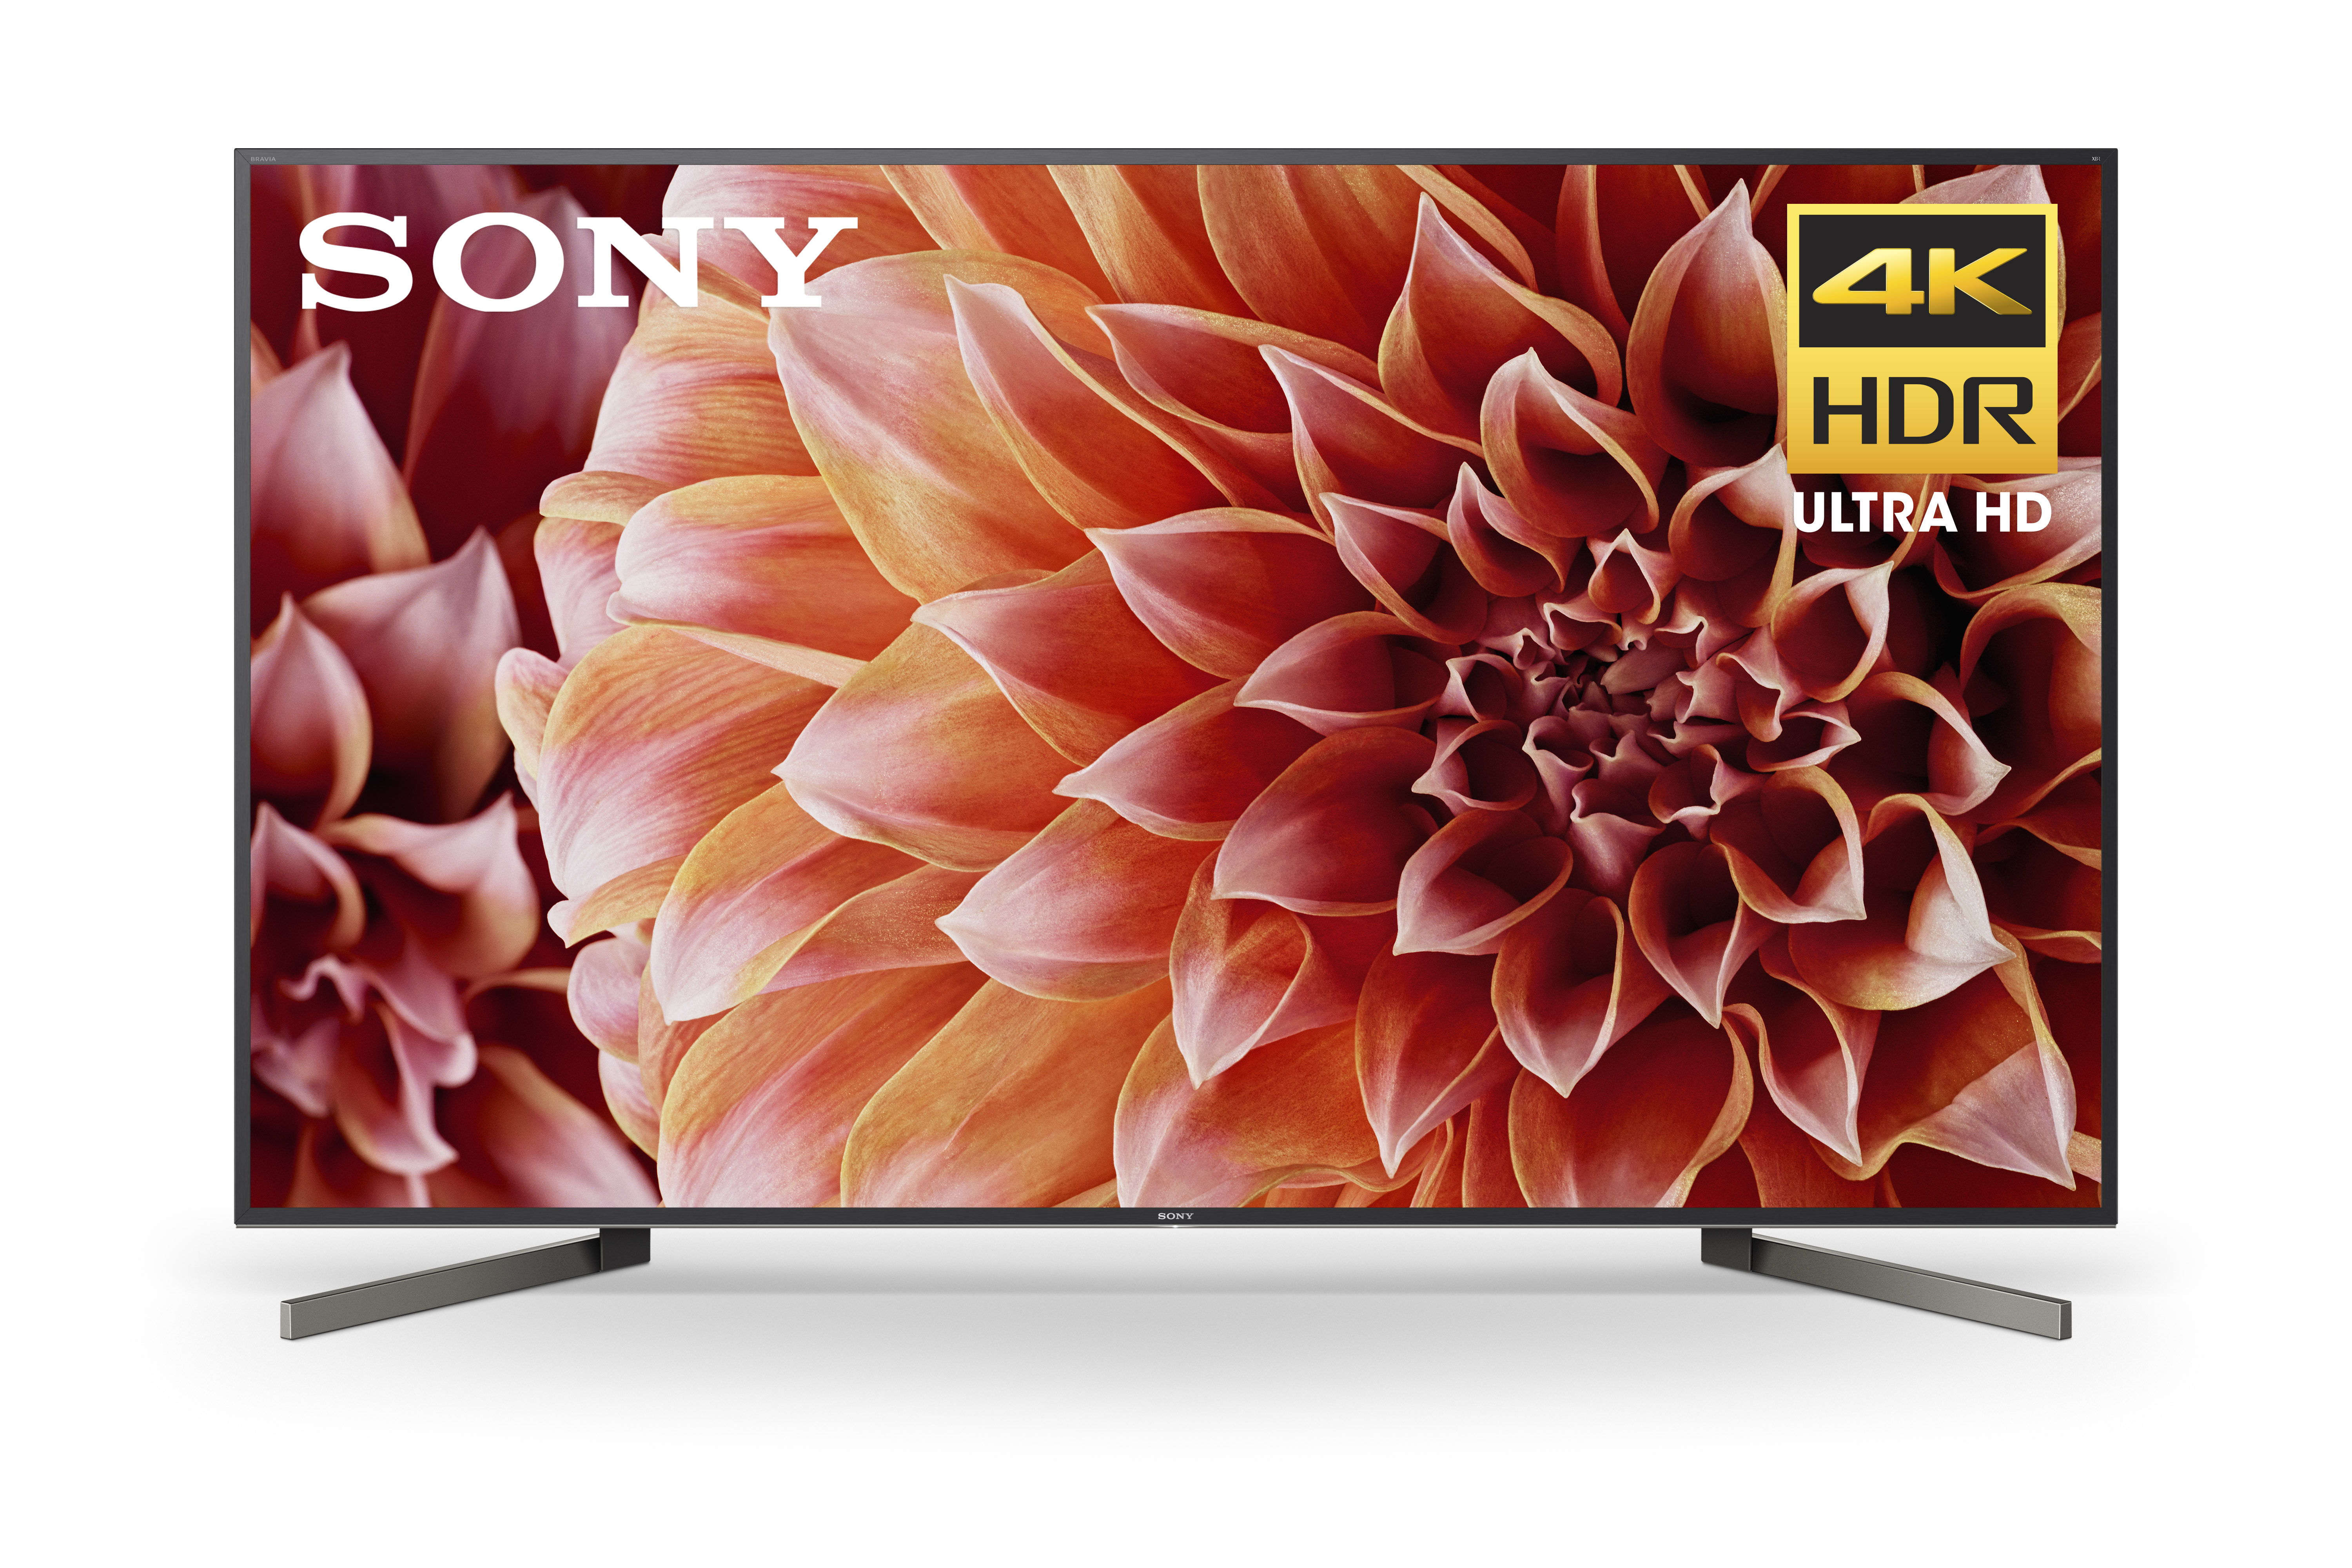 Sony 65" Class 4K UHD LED Android Smart TV HDR BRAVIA 900F Series XBR65X900F - image 1 of 21